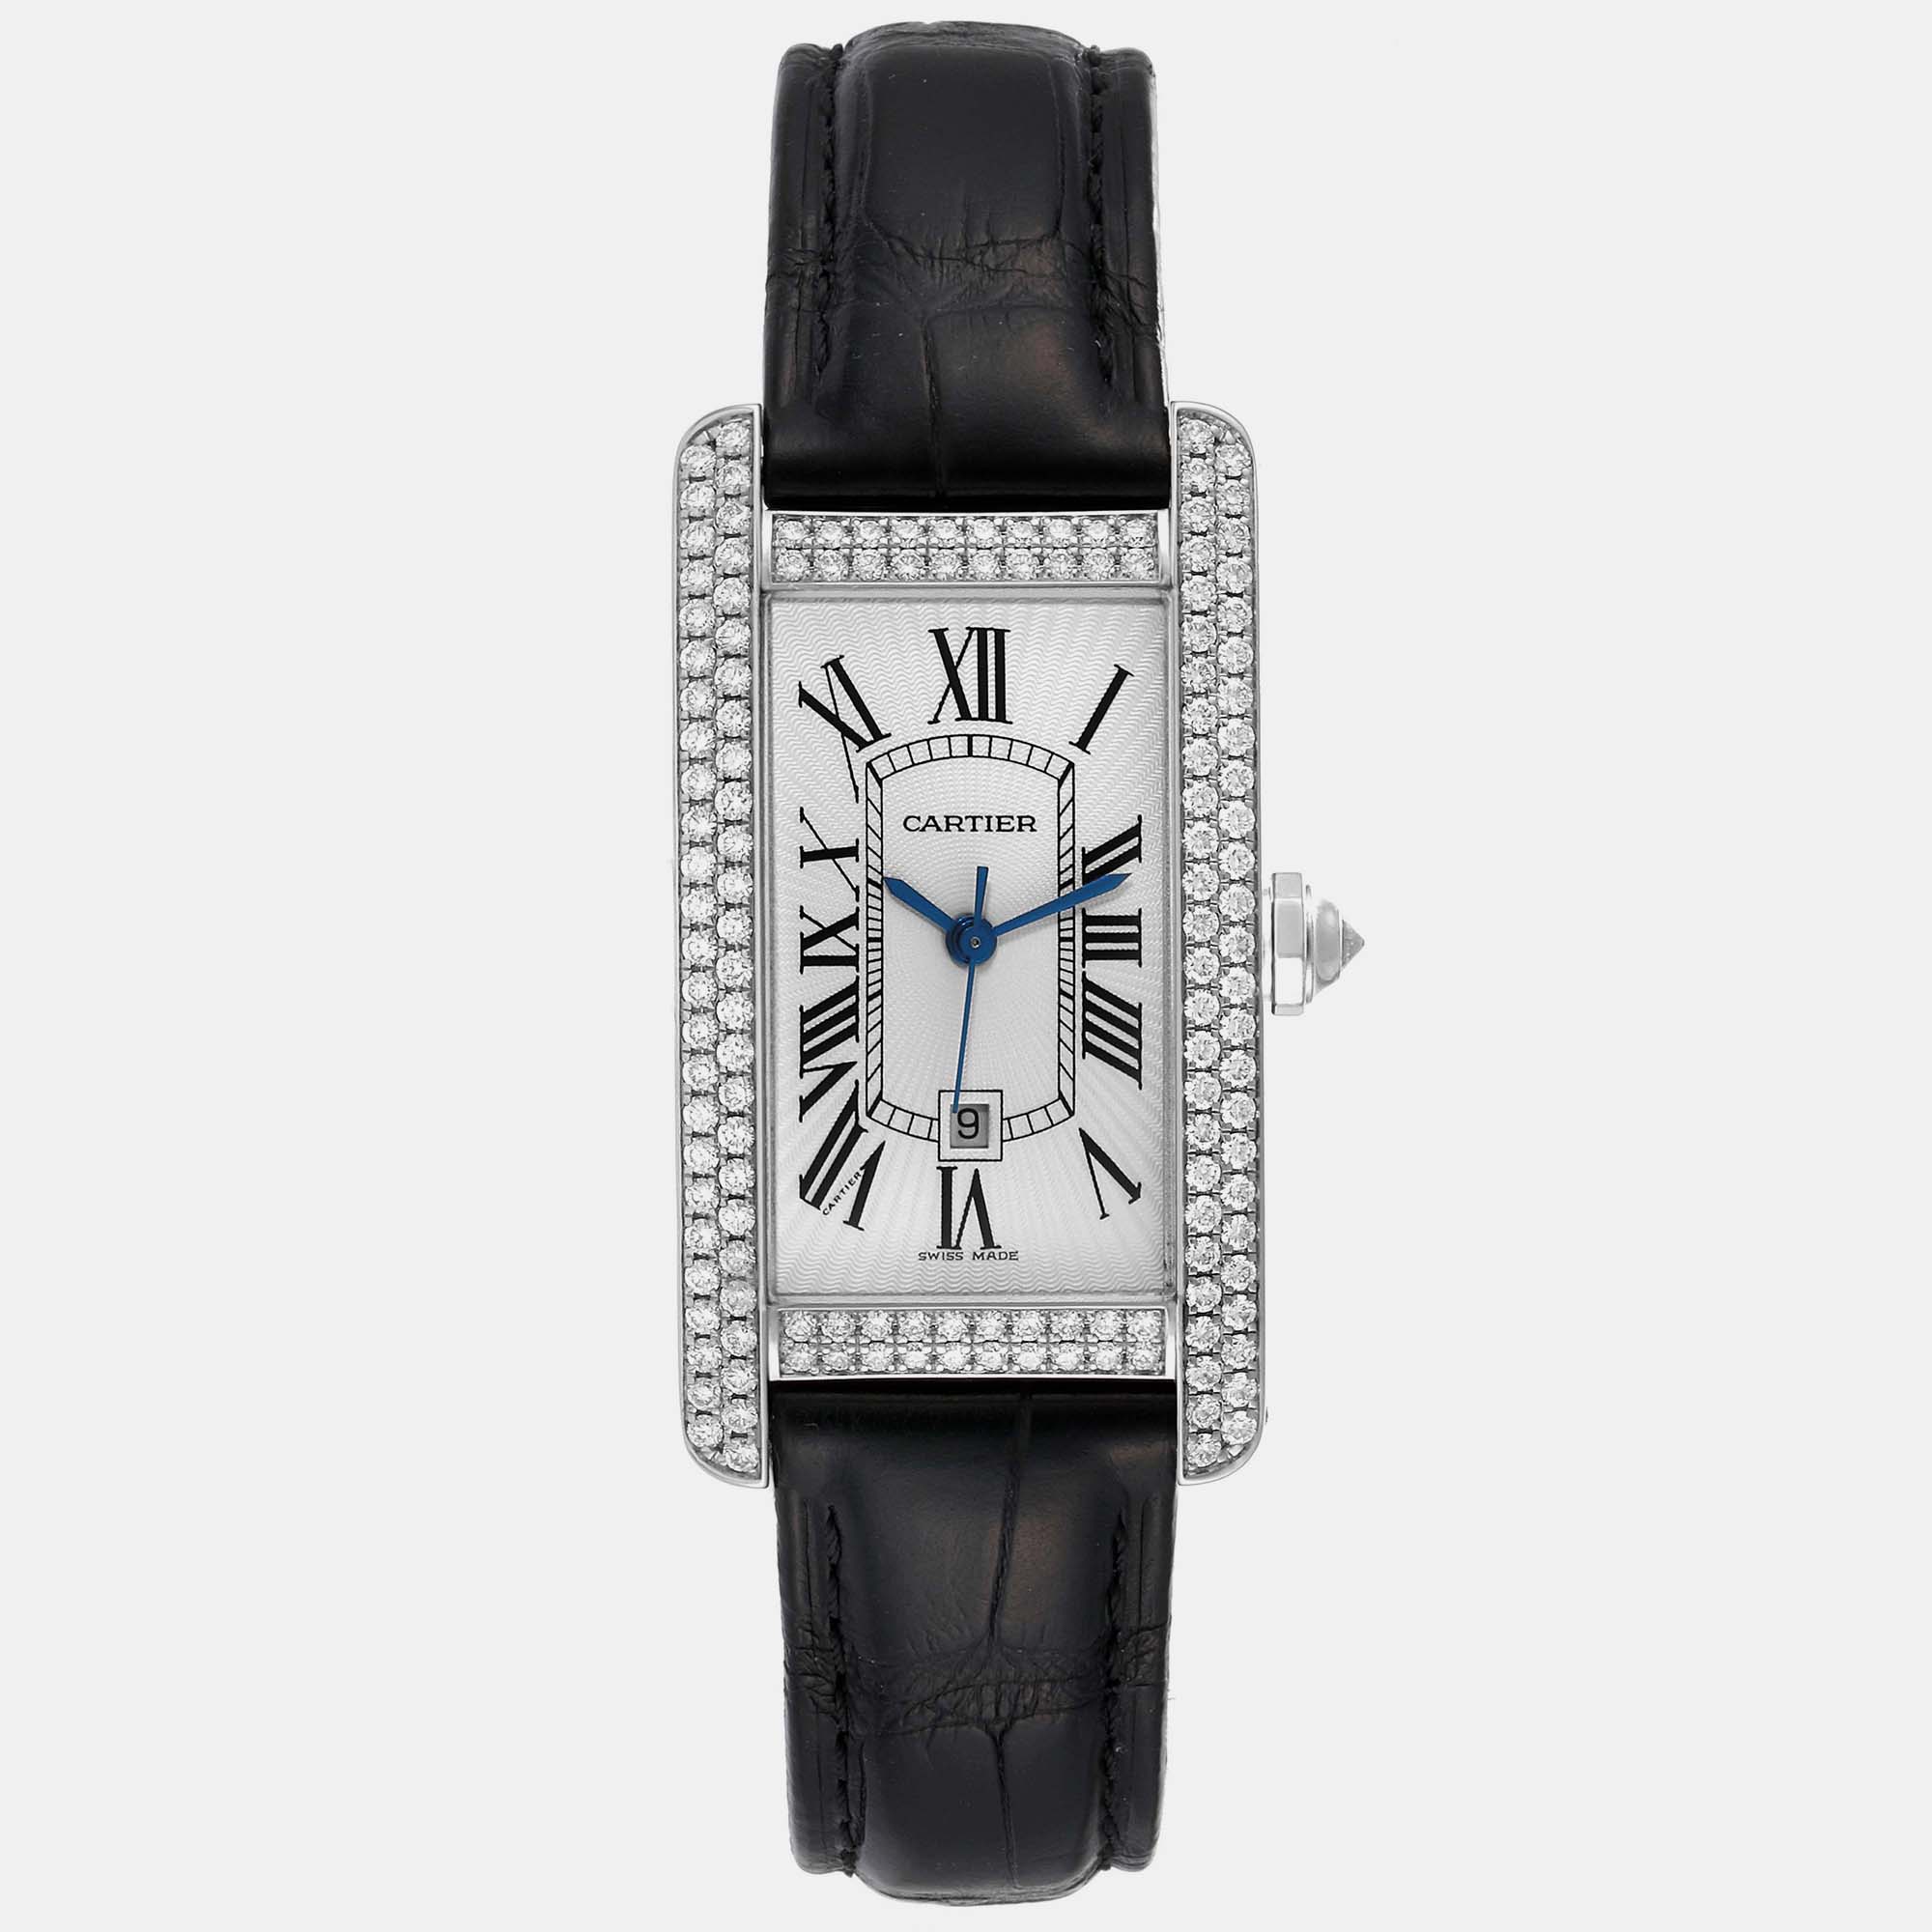 Pre-owned Cartier Tank Americaine White Gold Diamond Ladies Watch 2490 22.0 Mm X 41.0 Mm In Silver